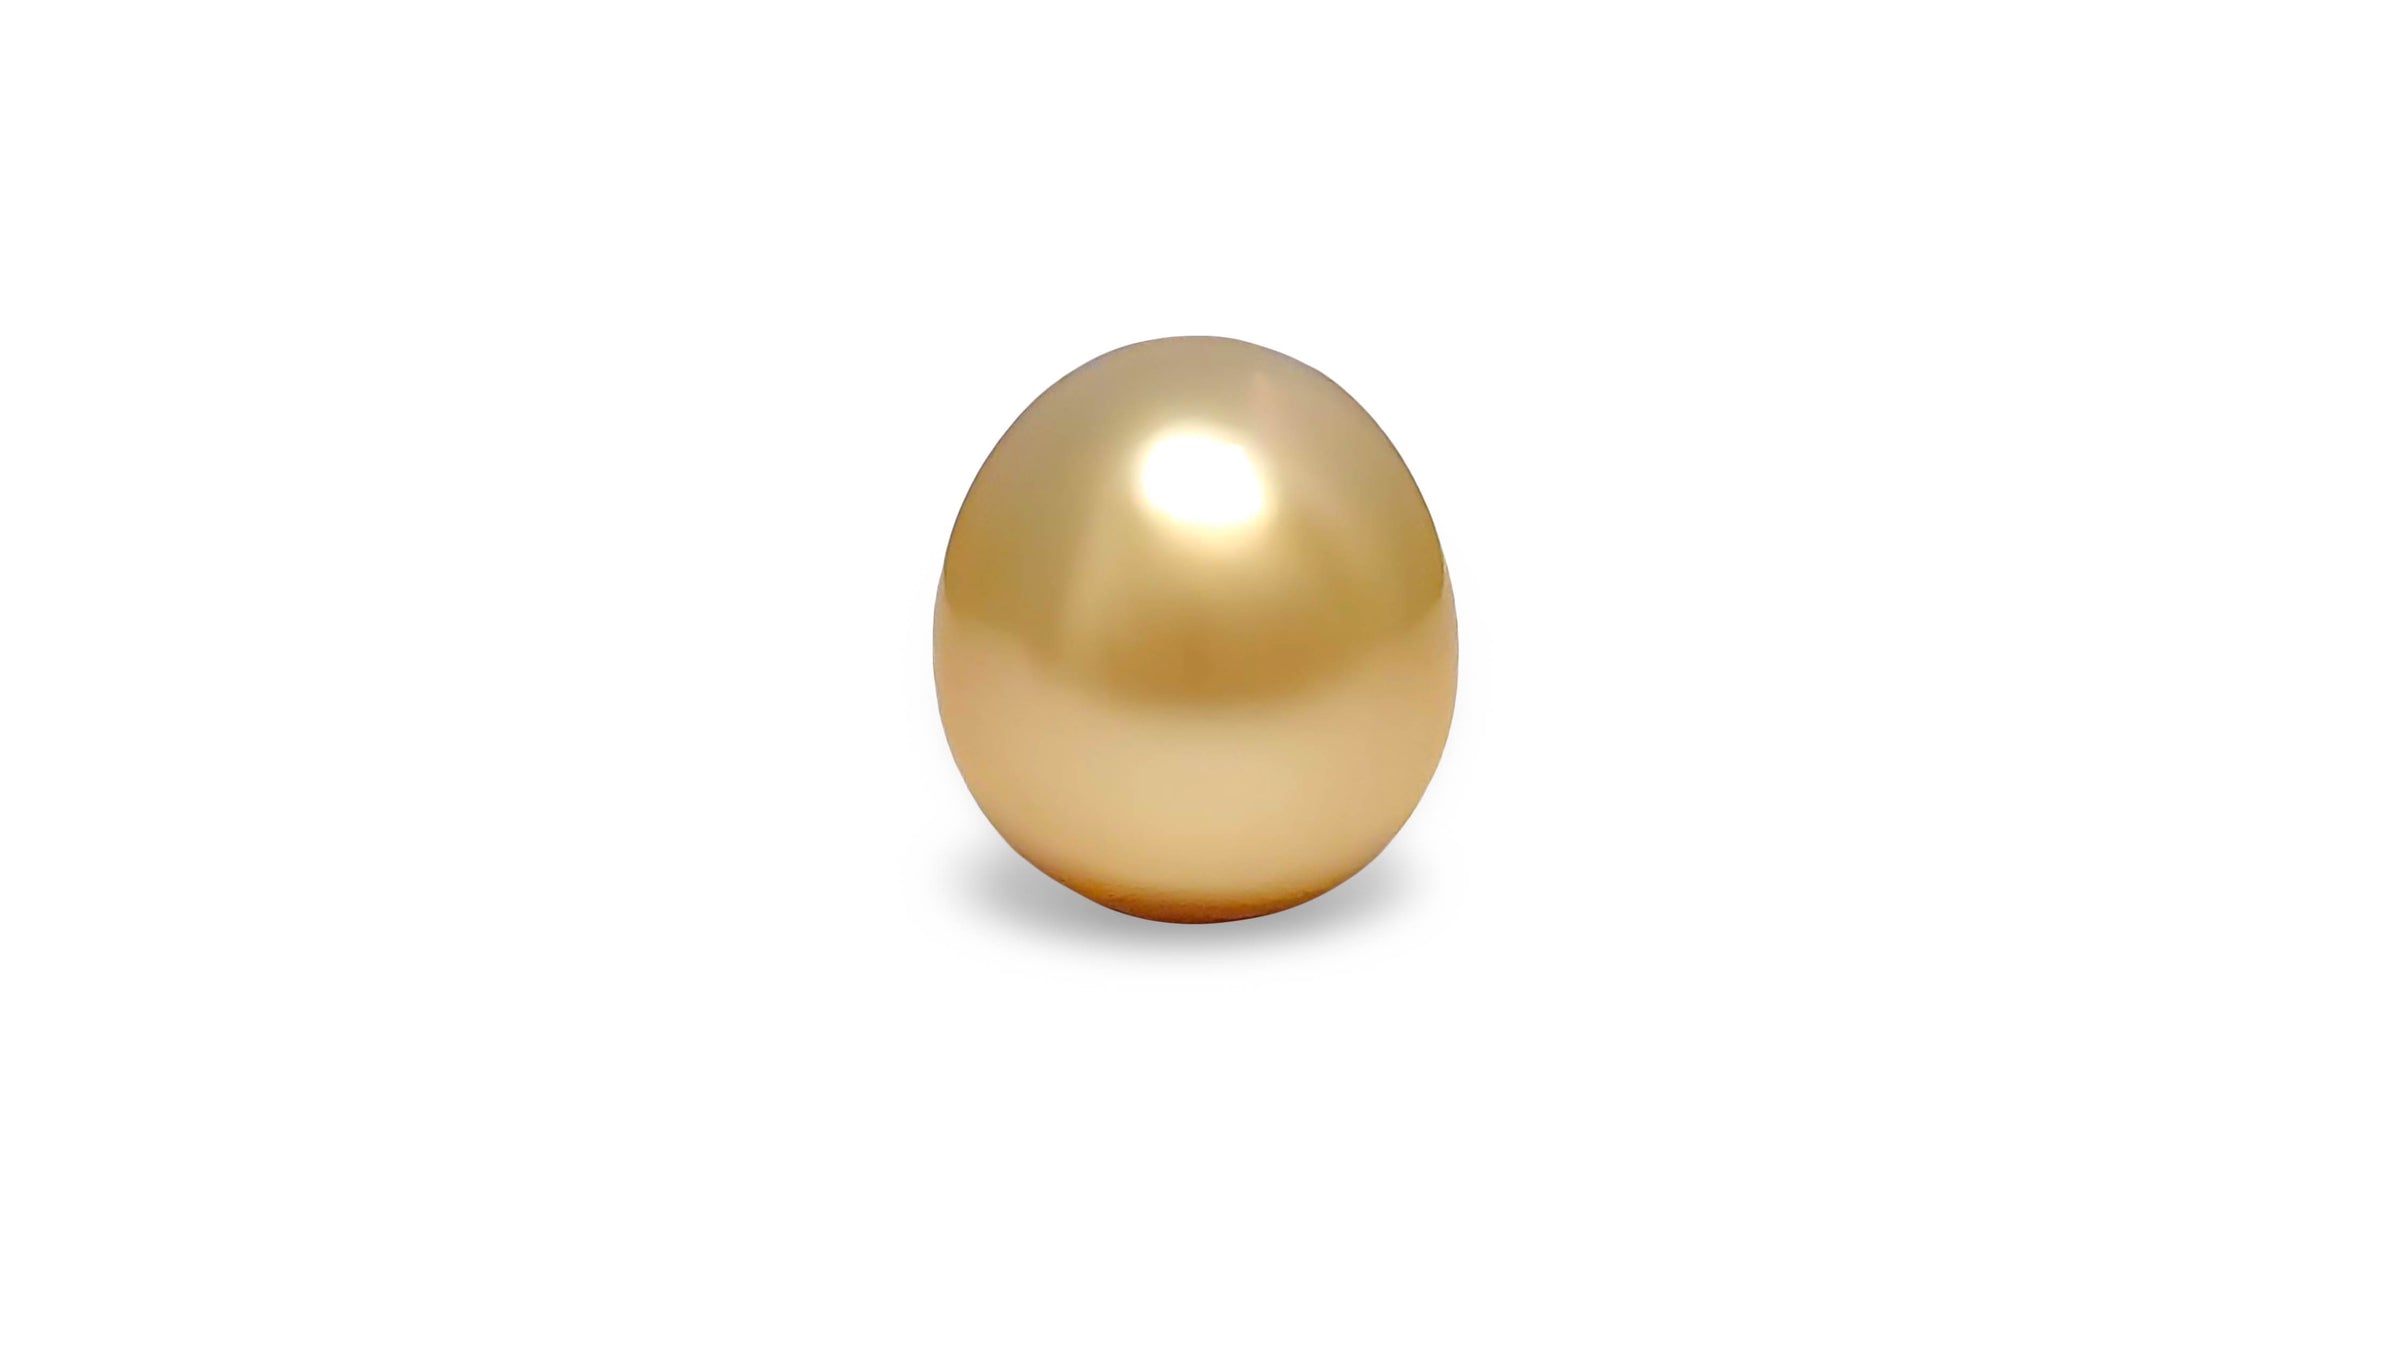 An oval shape golden South Sea pearl is displayed on a white background.